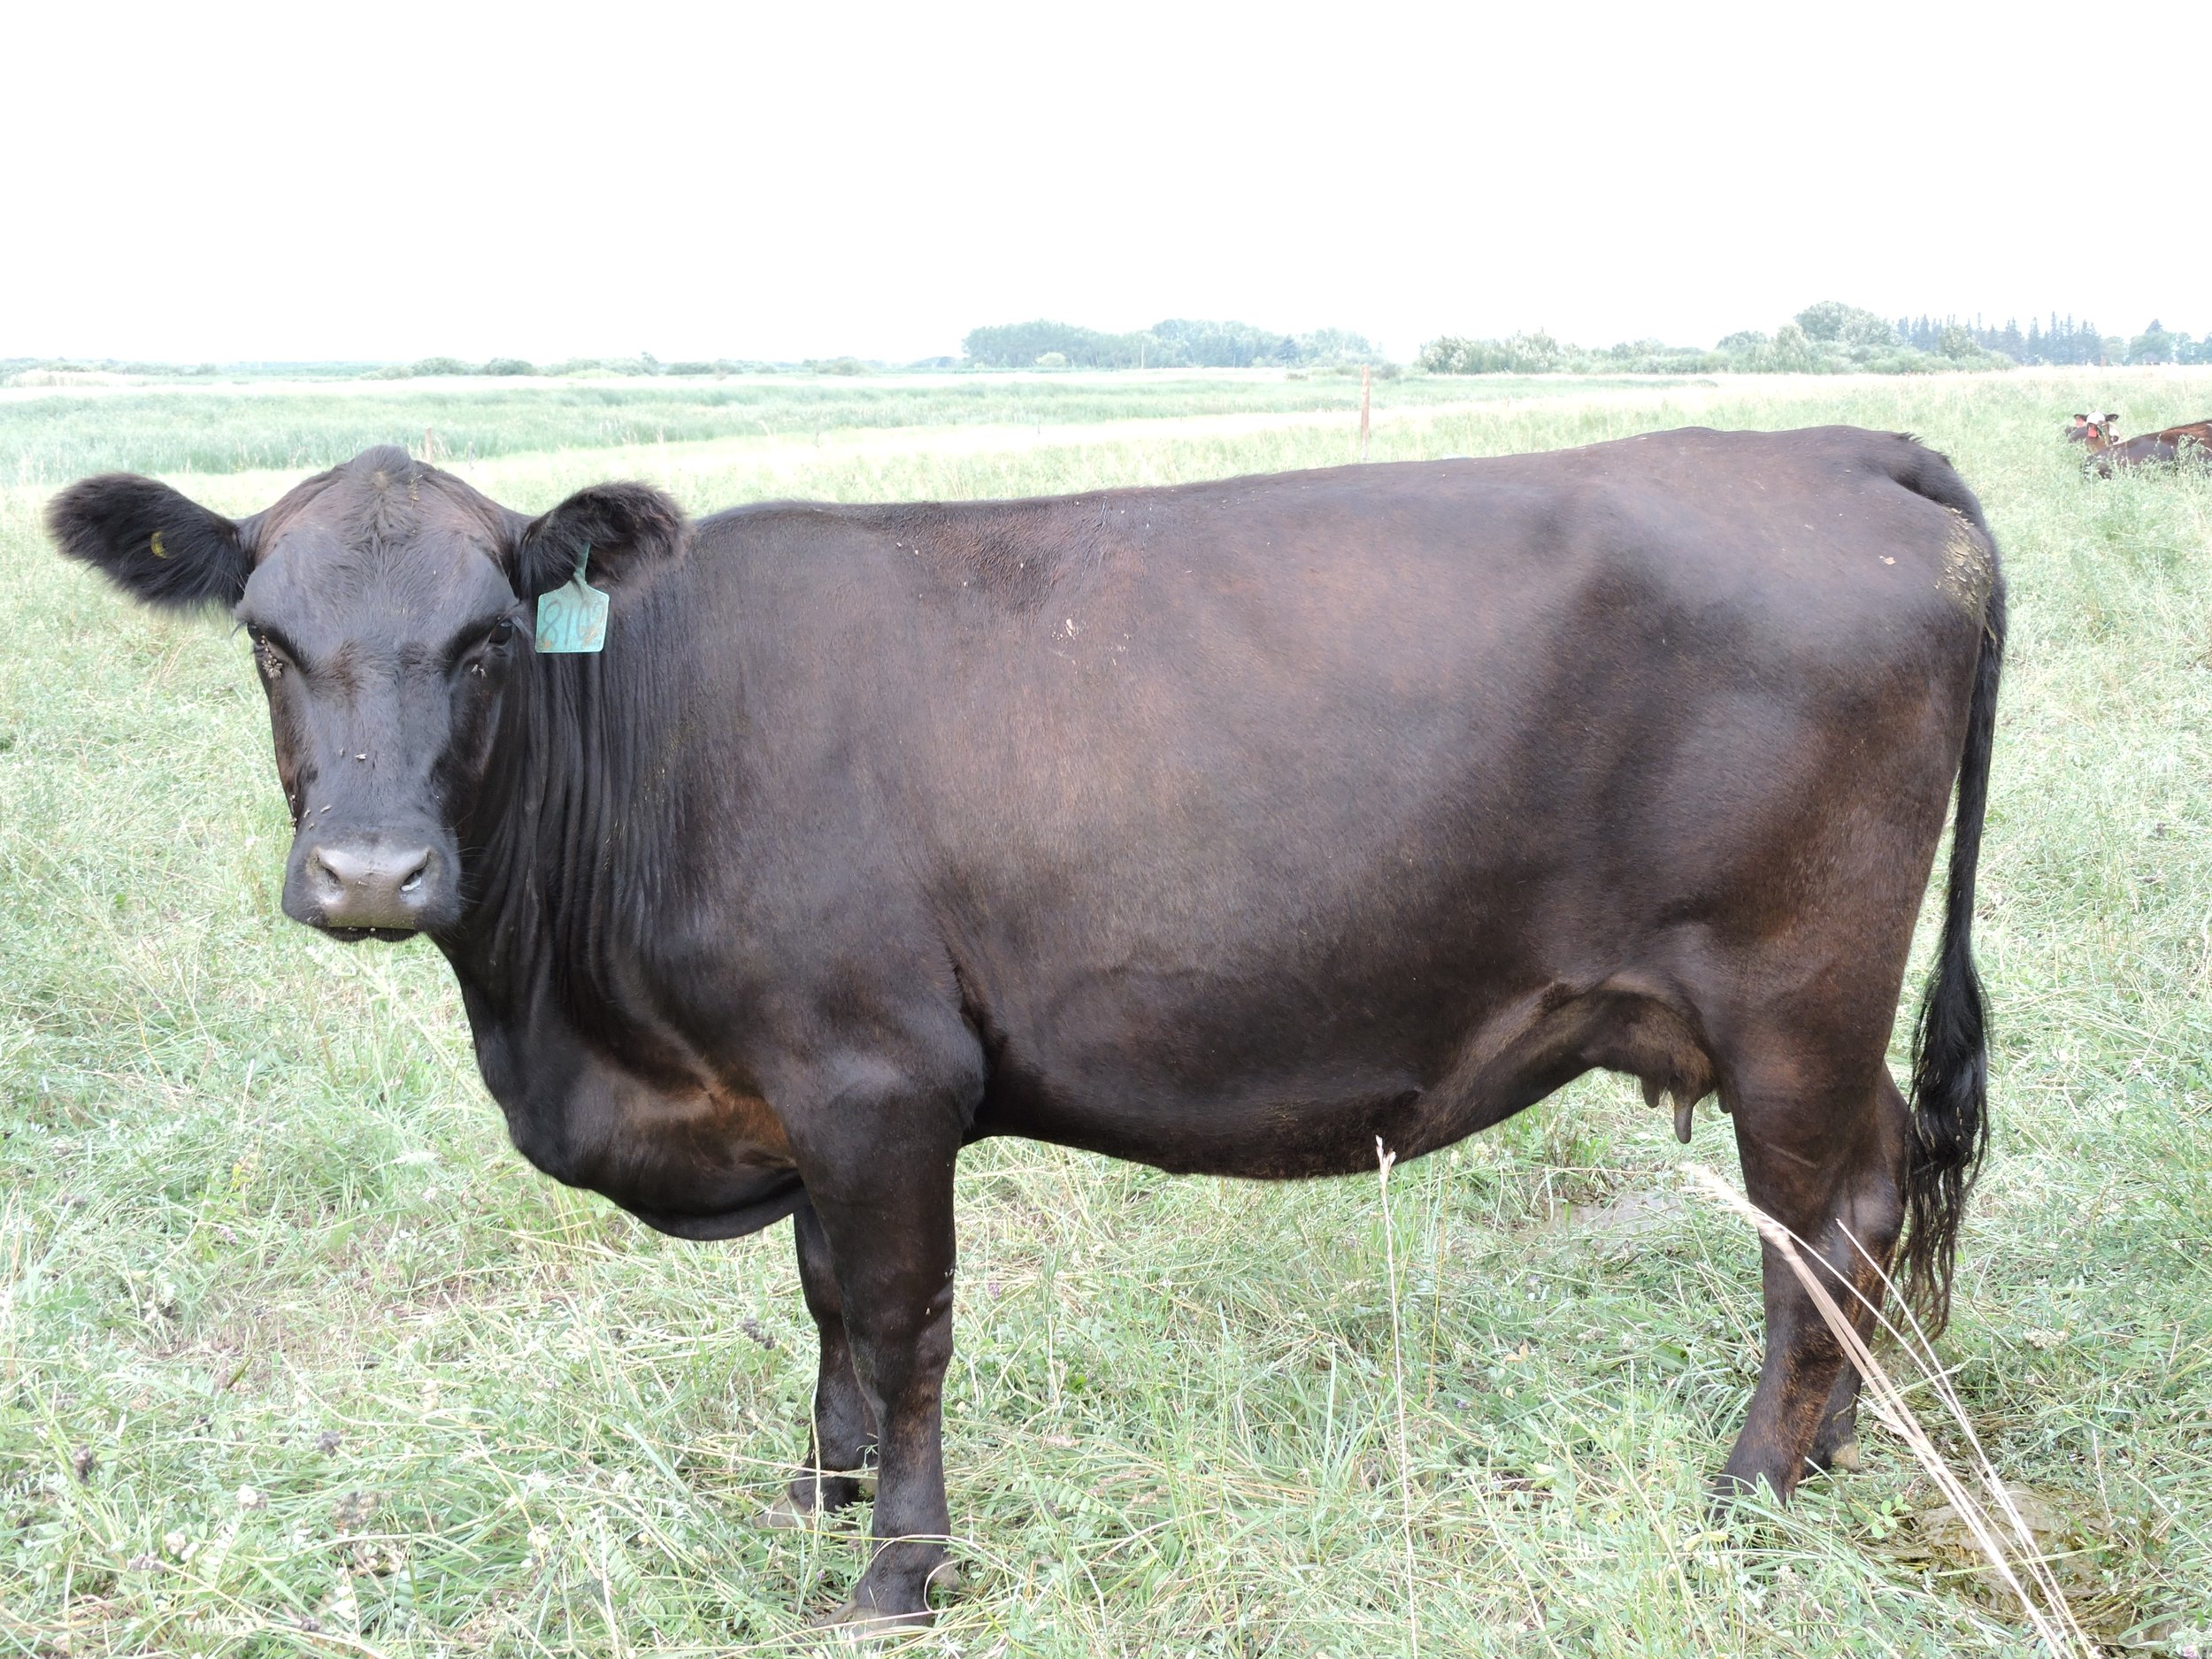 Example picture of a cow from the group consuming Altosid IGR through their mineral.